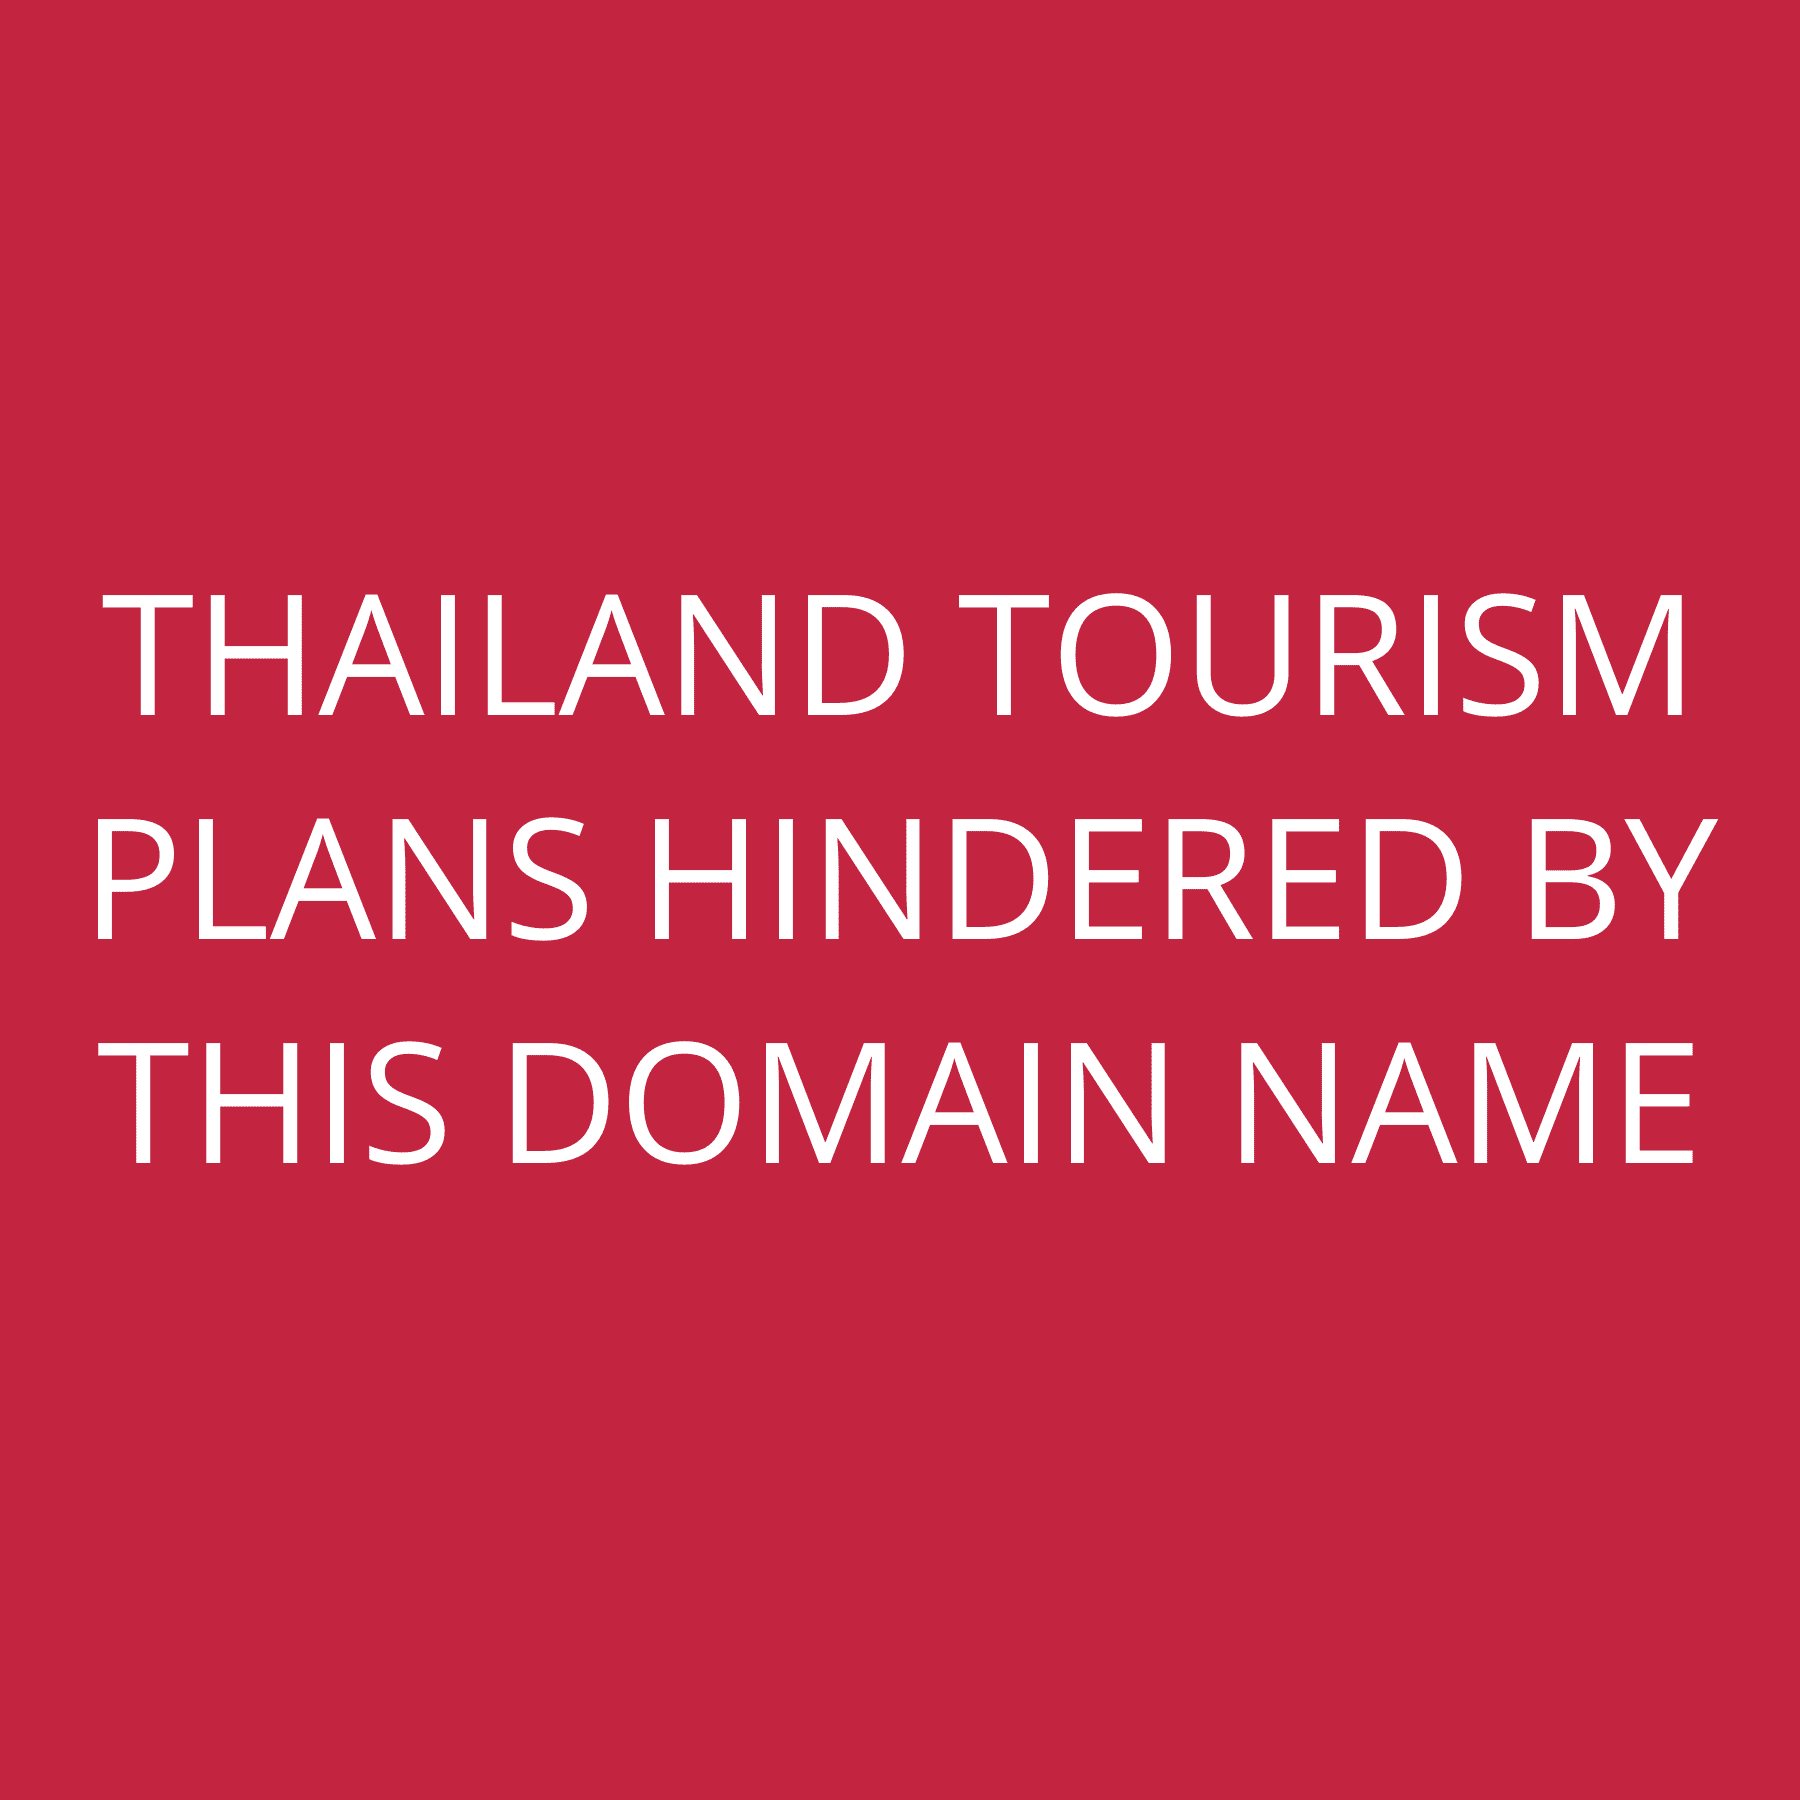 Thailand Tourism plans hindered by this domain name